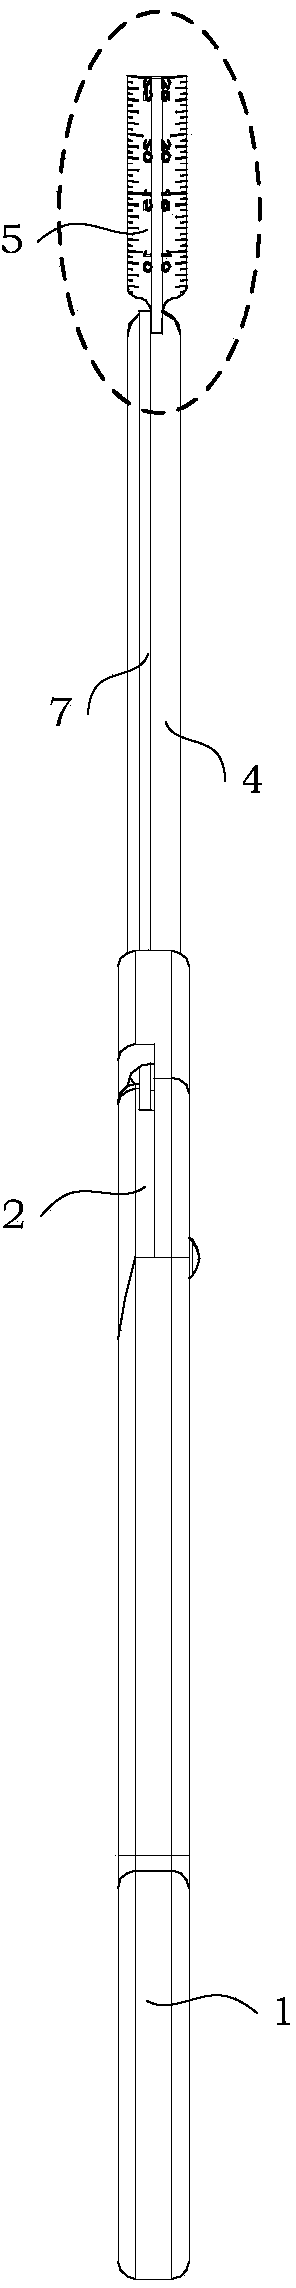 Medical measuring device for measuring structure size in human joint